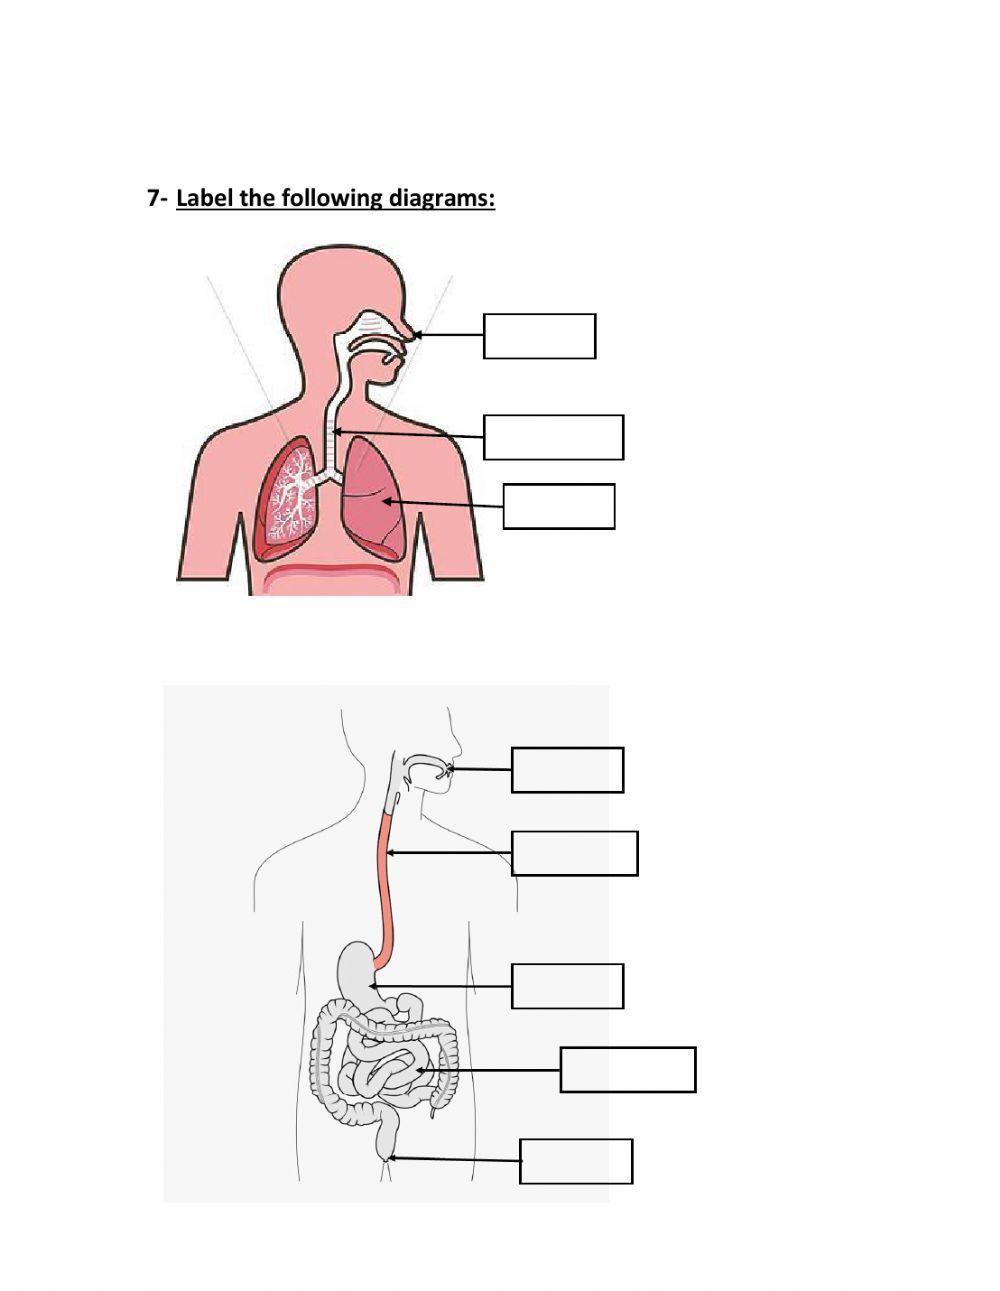 The Respiratory System and The Digestive System